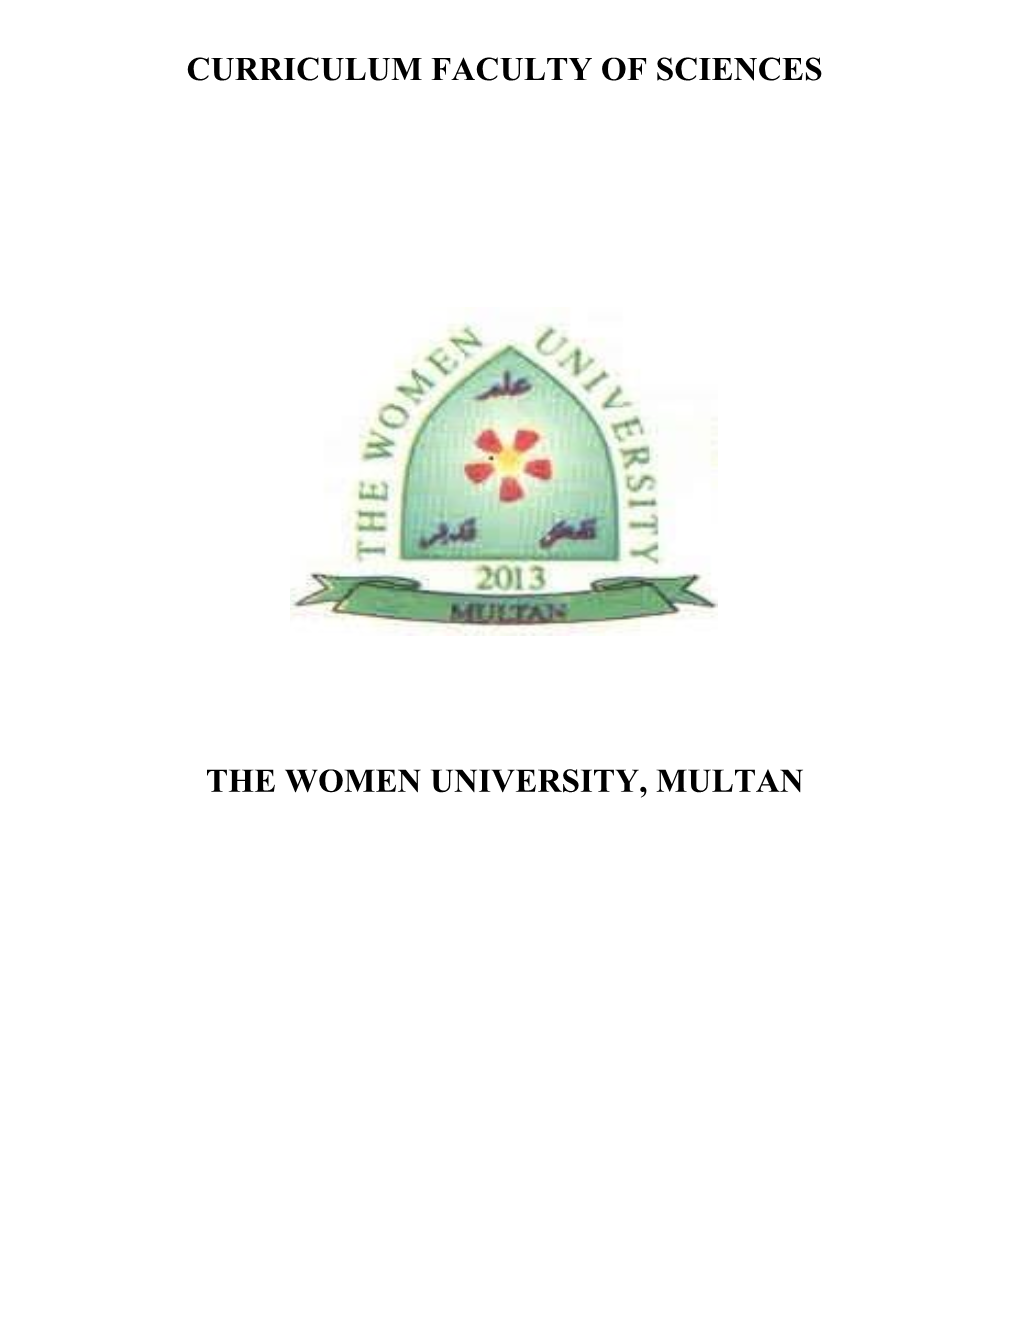 Curriculum Faculty of Sciences the Women